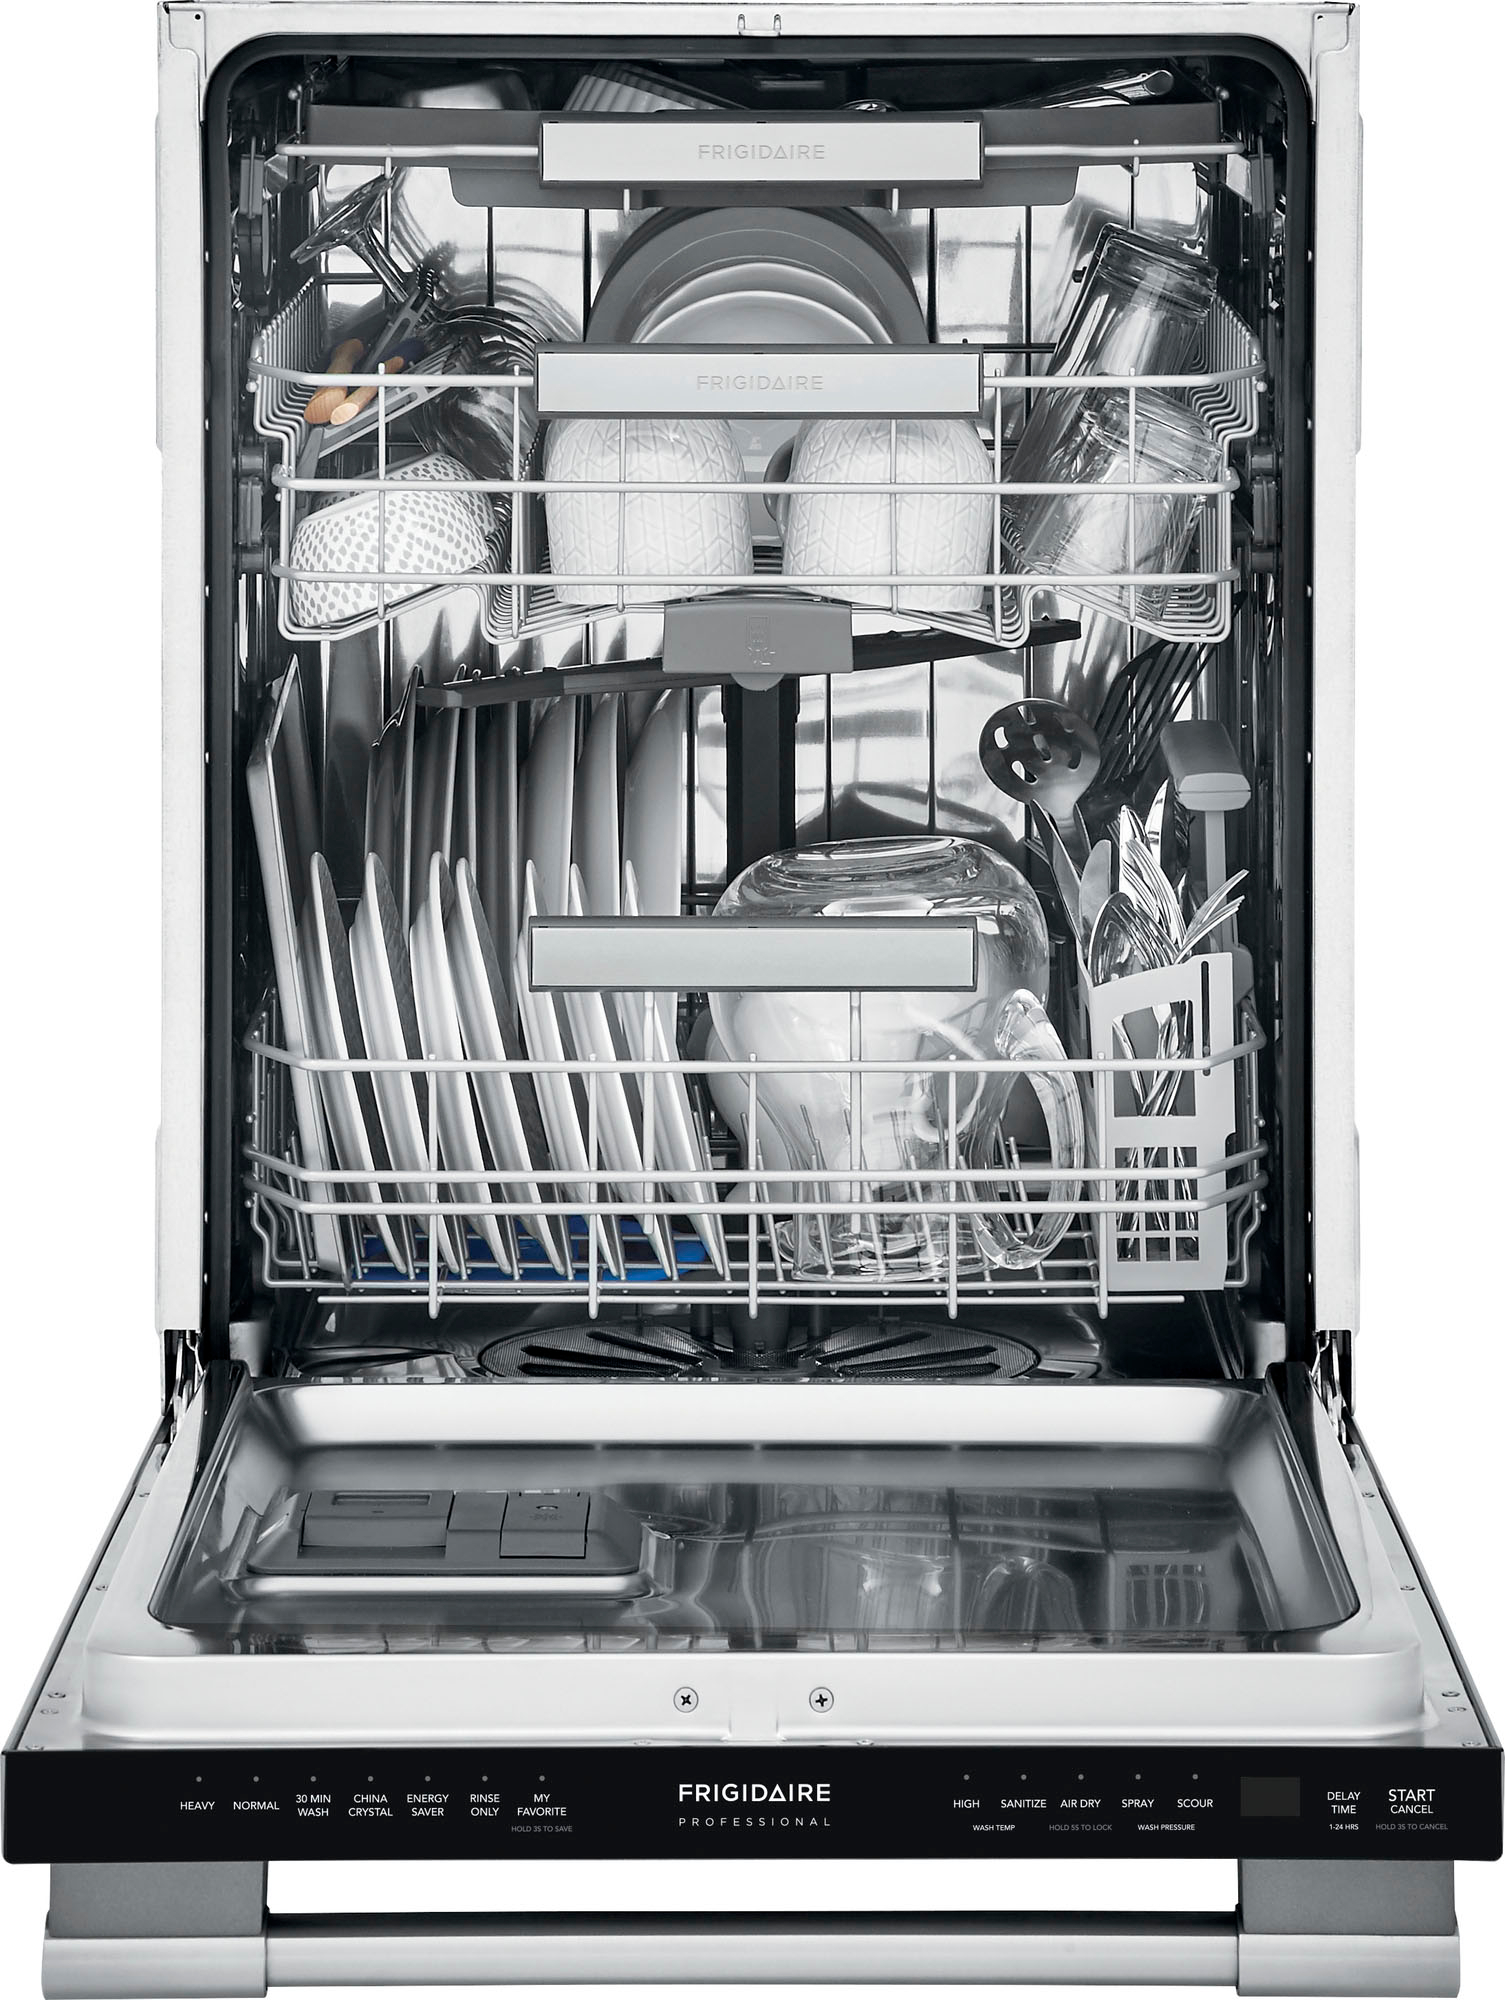 Angle View: Frigidaire Professional 24" Built-In Dishwasher - Stainless Steel